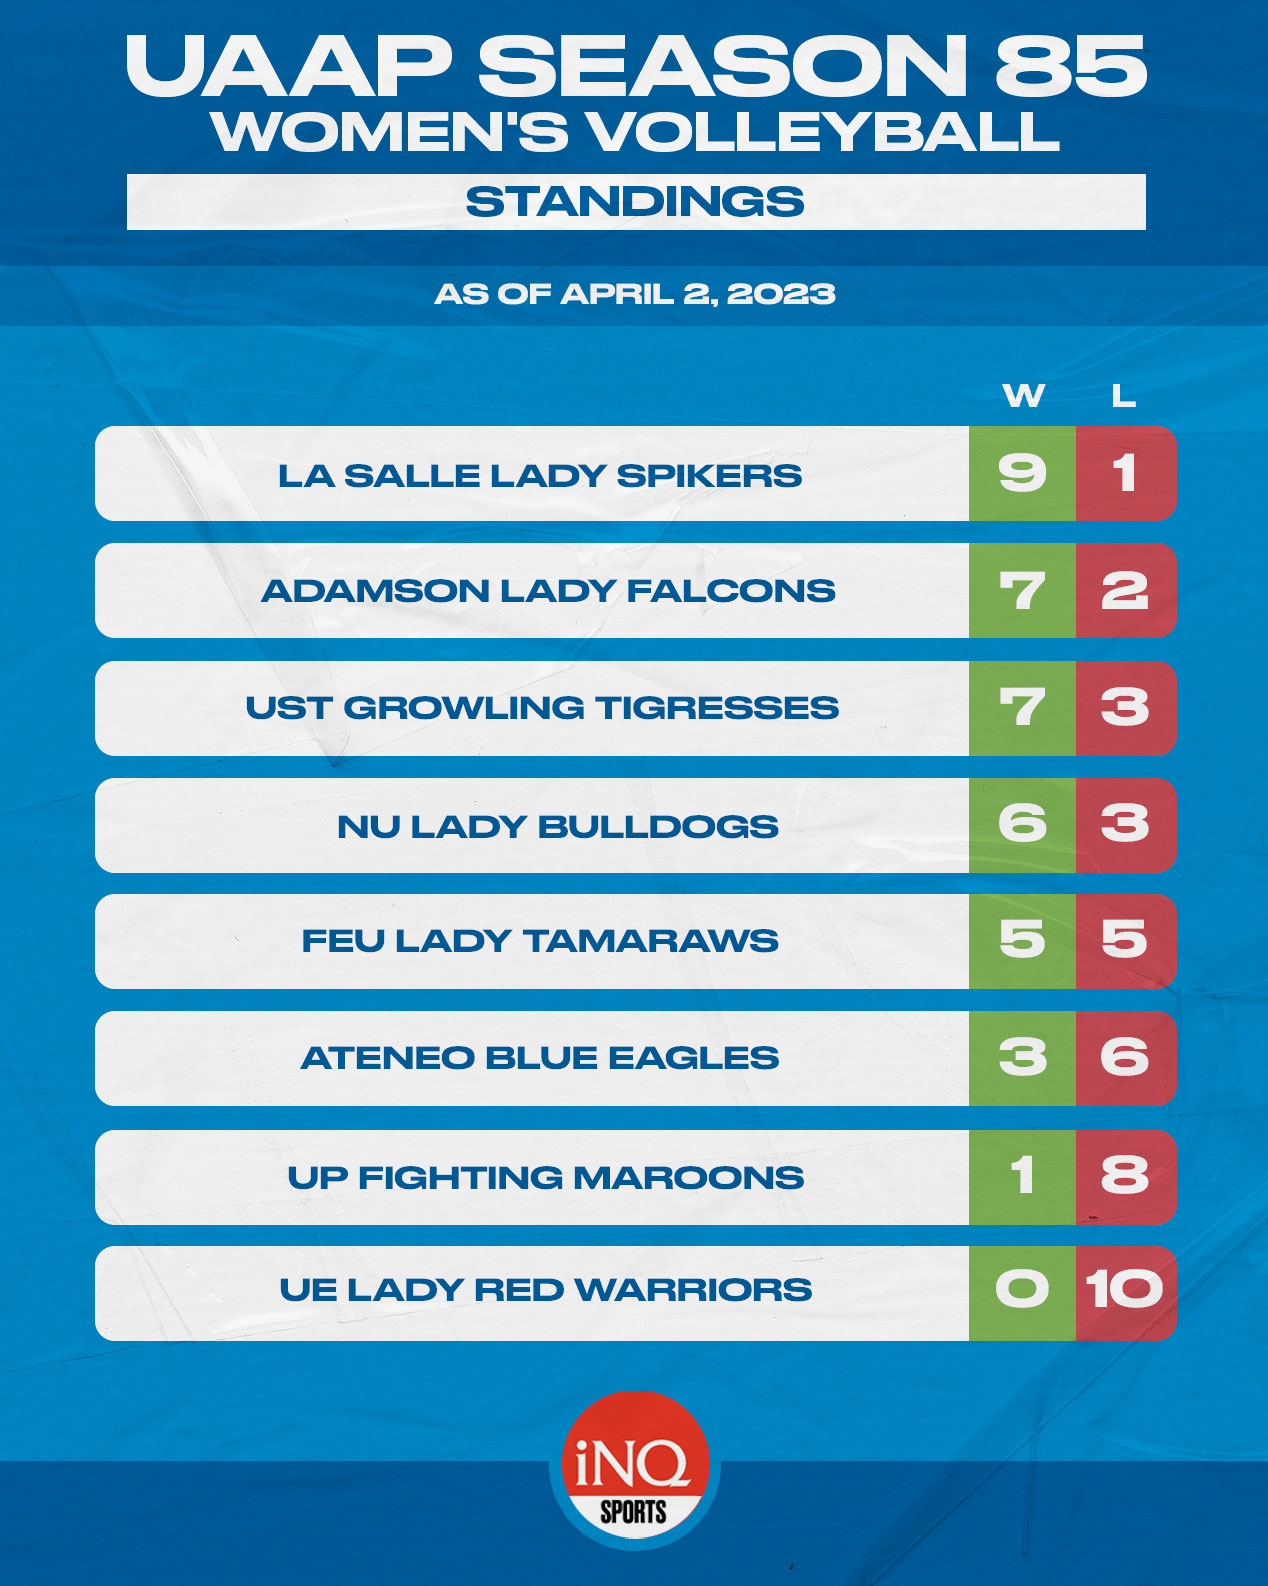 UAAP women's volleyball standings as of April 2.